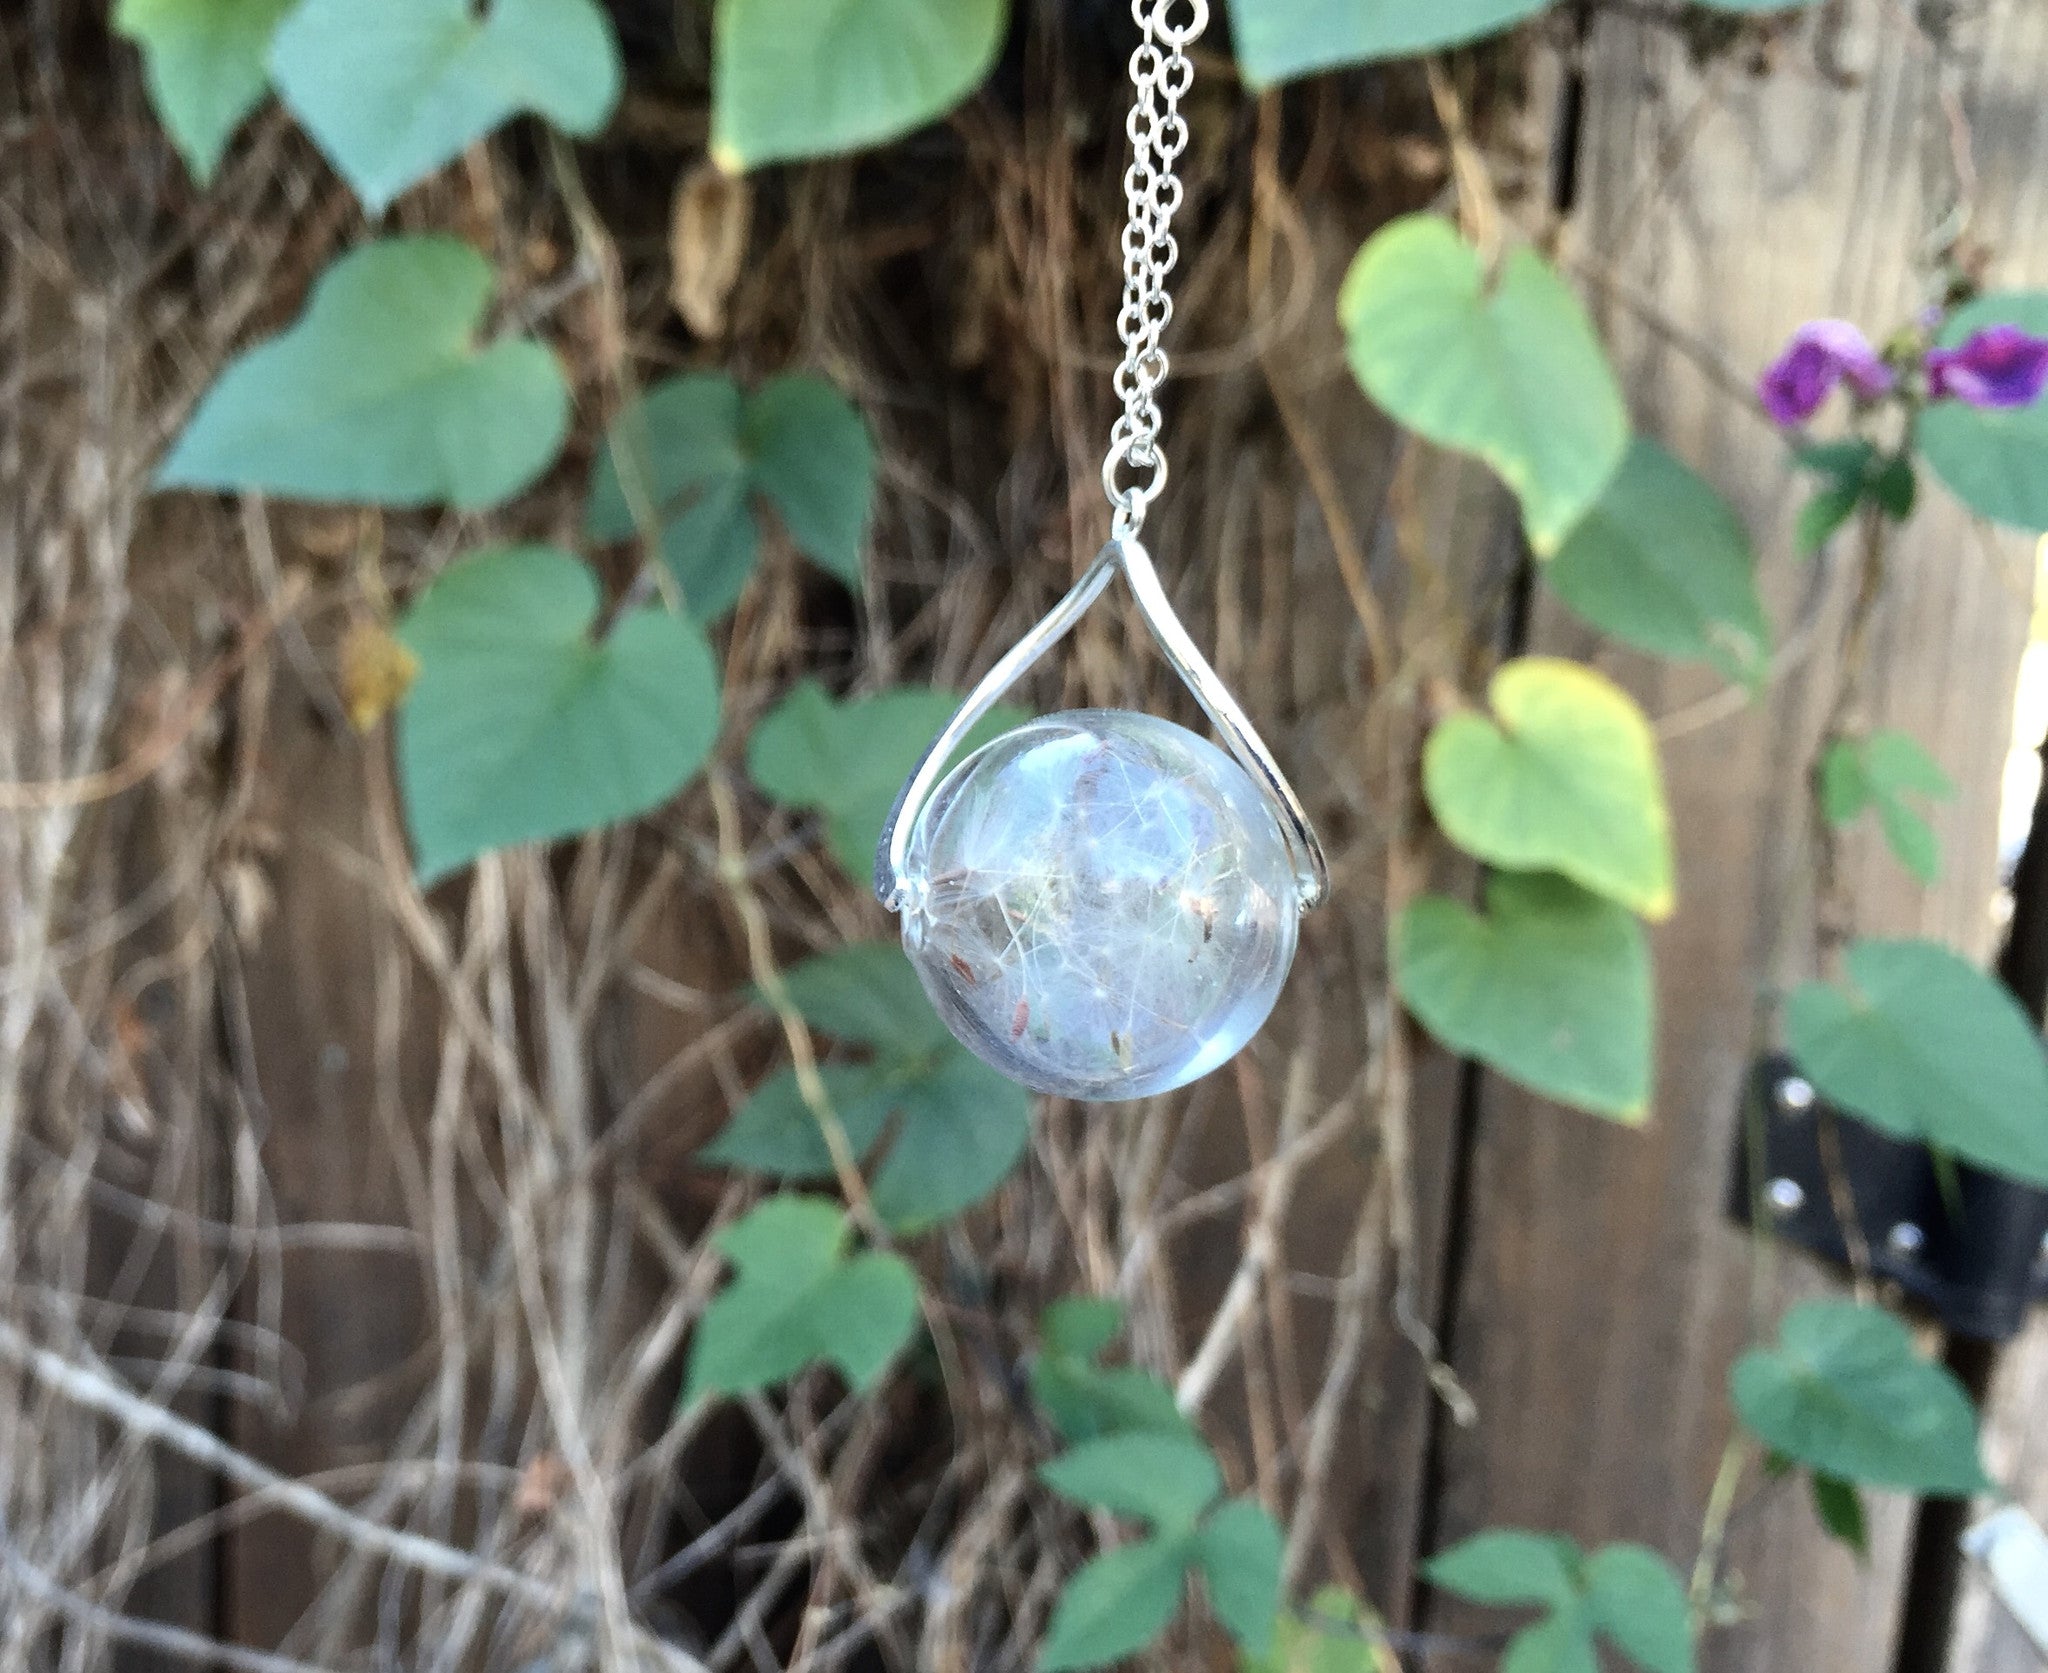 Dandelion Wish Orb Necklace | Large Glass Dandelion Necklace | Real Dandelion Wishes Pendant | Whimsical Gift - Enchanted Leaves - Nature Jewelry - Unique Handmade Gifts